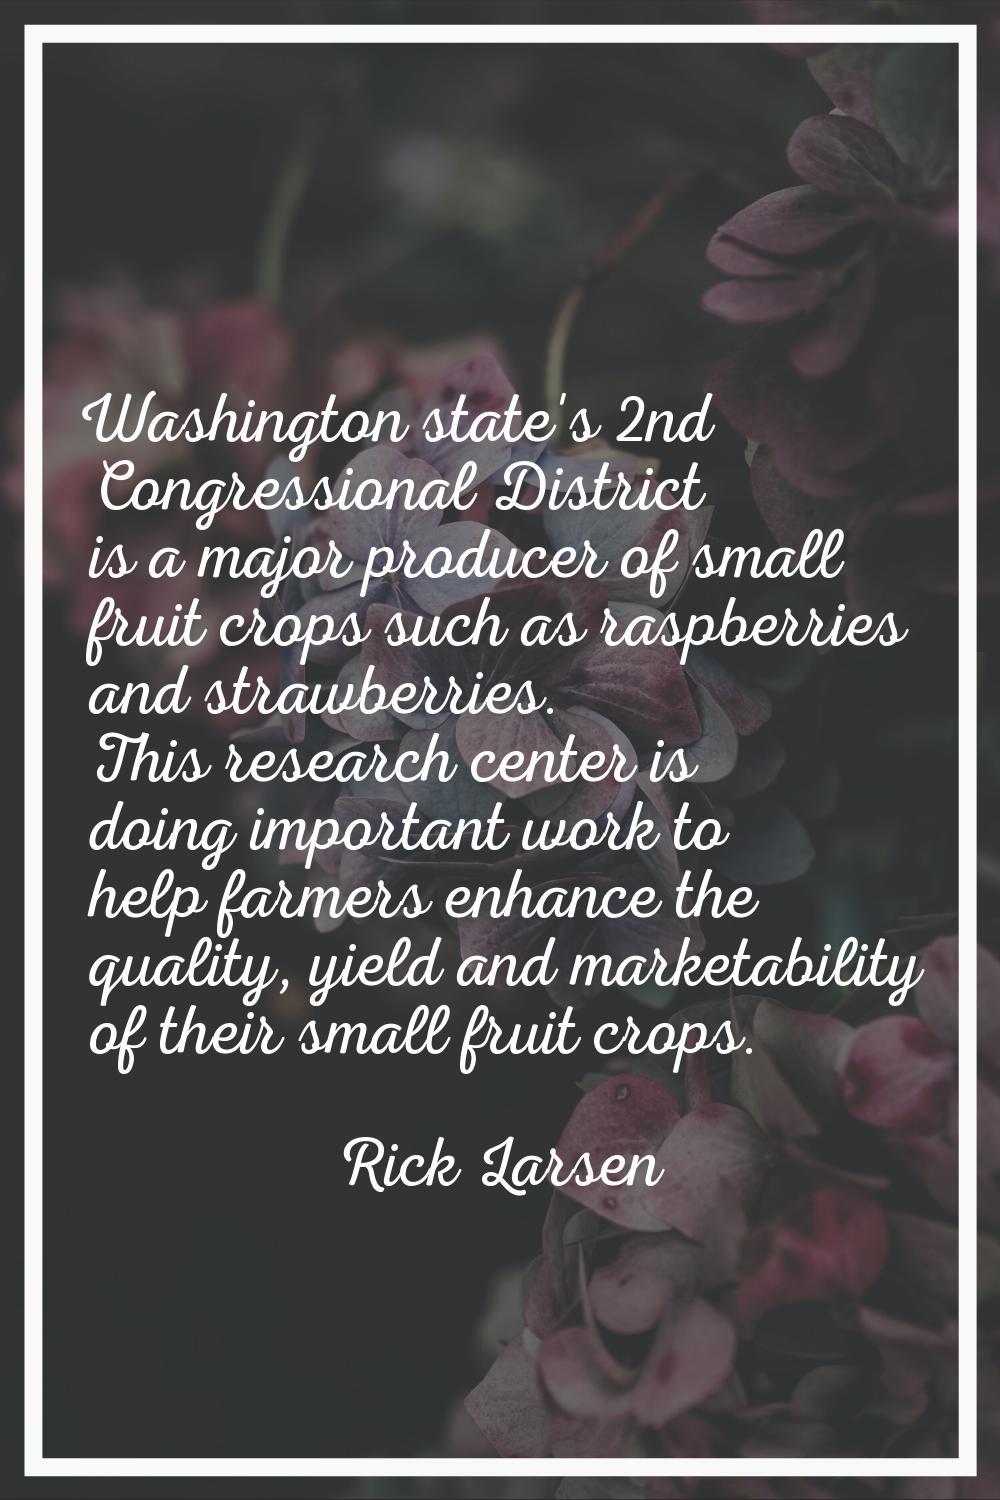 Washington state's 2nd Congressional District is a major producer of small fruit crops such as rasp